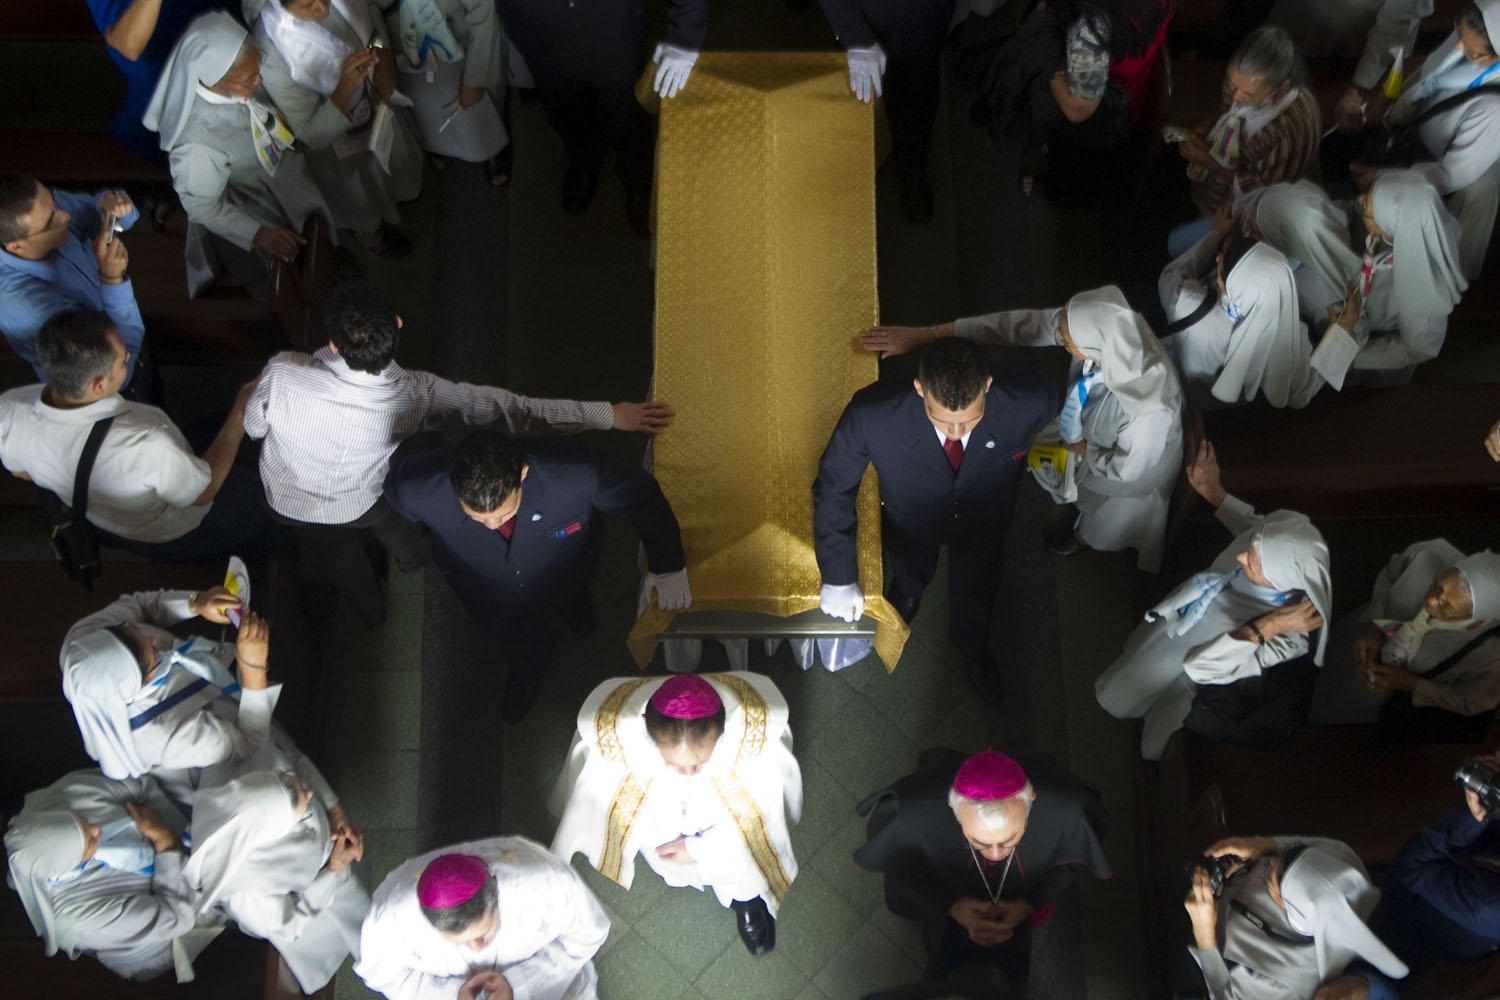 May 26, 2013. Members of a funeral home carry the coffin with the remains of Saint Mother Laura Montoya to her tomb during a ceremony  for the 139th anniversary of her birth  at the convent where she lived in Medellin, Antioquia department, Colombia.